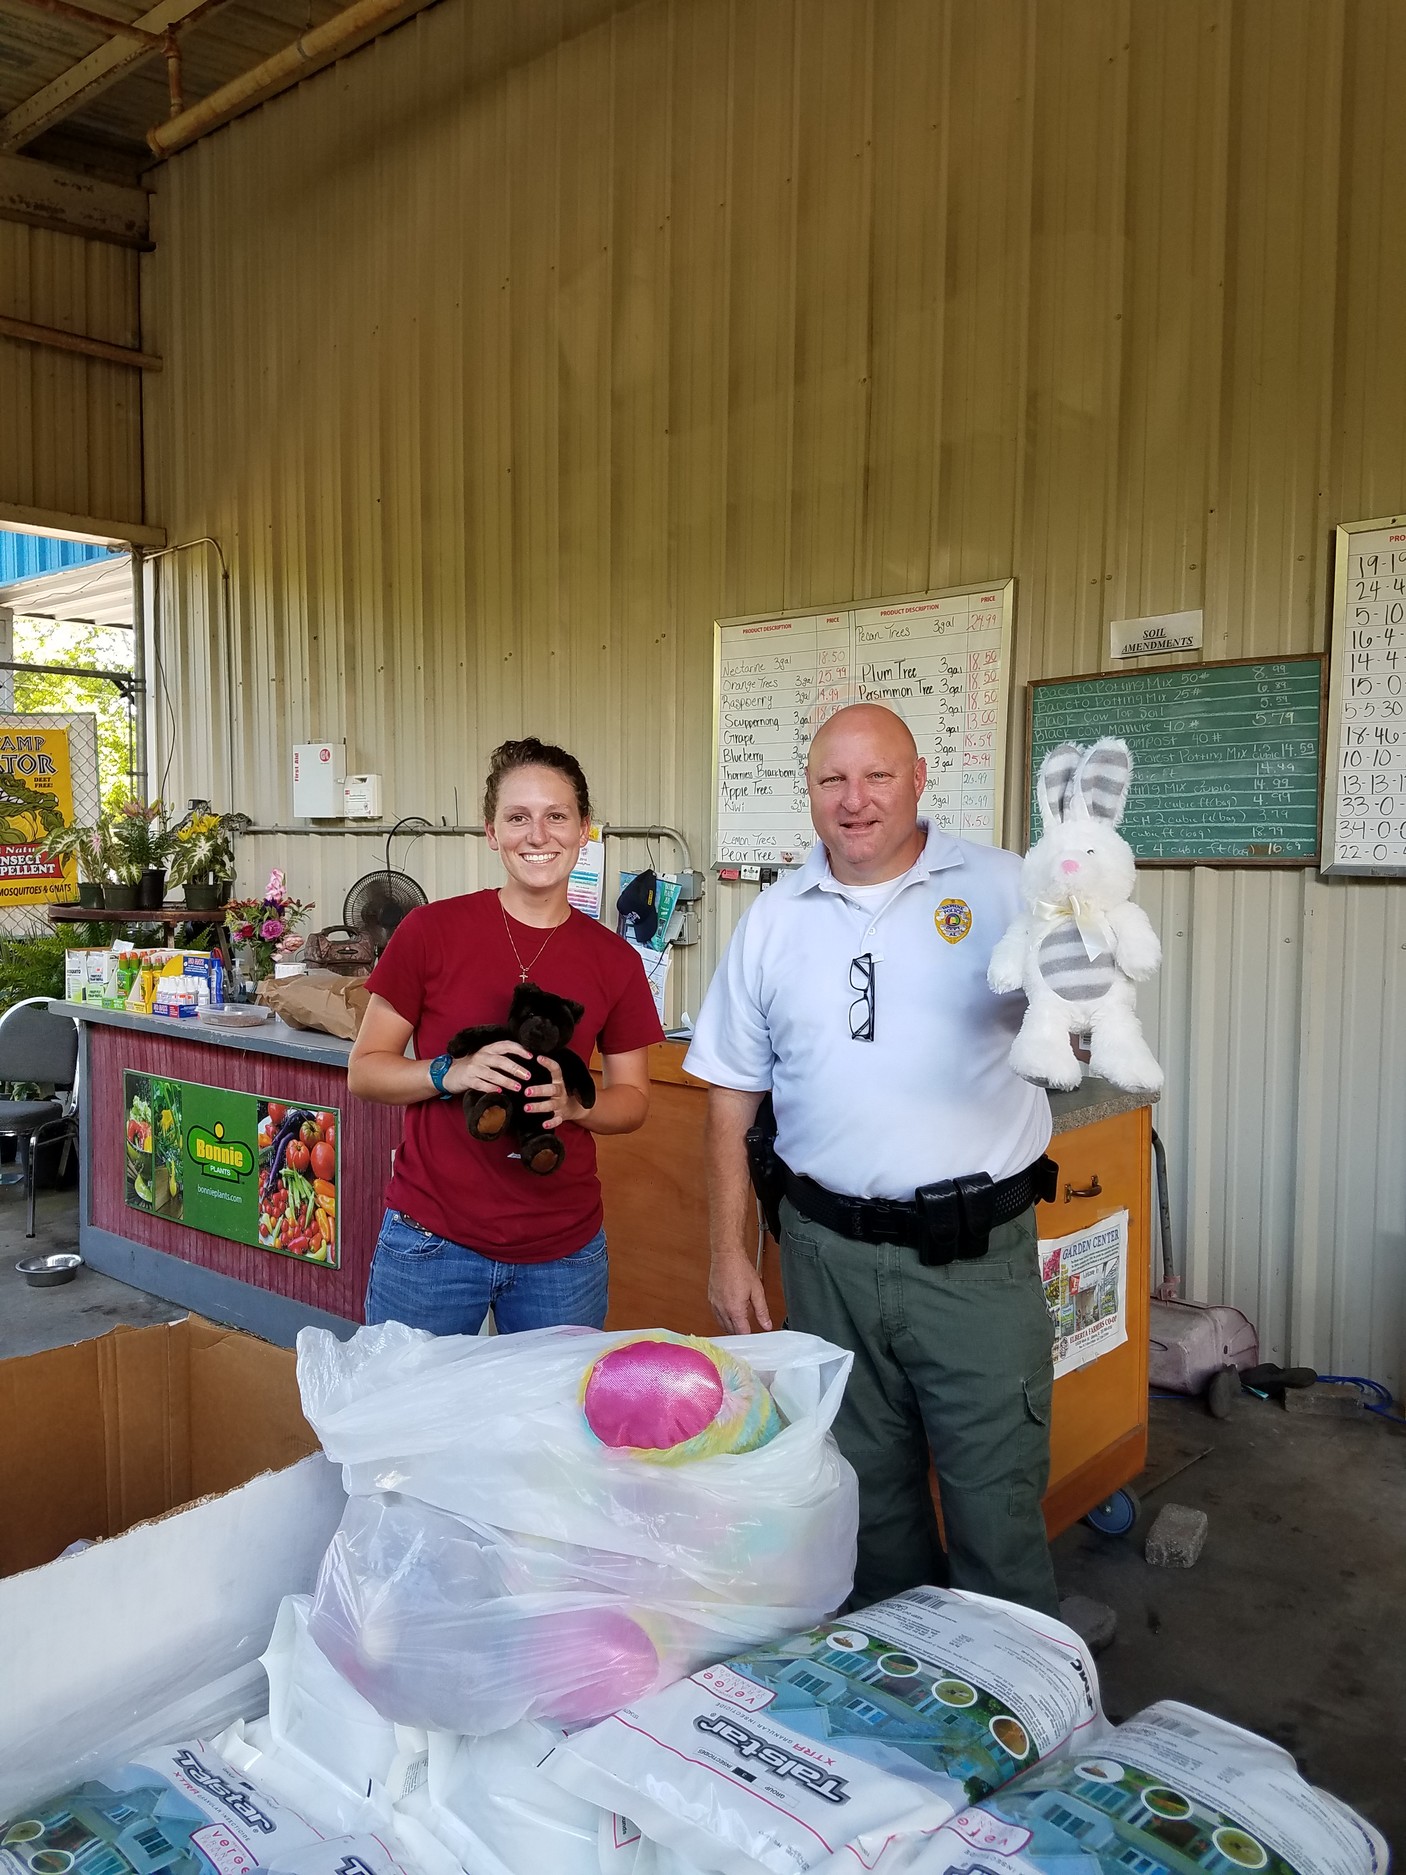 Elberta Farmers Co-Op employee Kristen Edwards and Daphne Sergeant Ken Lassiter, on the morning of May 16, when Lassiter dropped by to pick up donated stuffed animals for the police department.